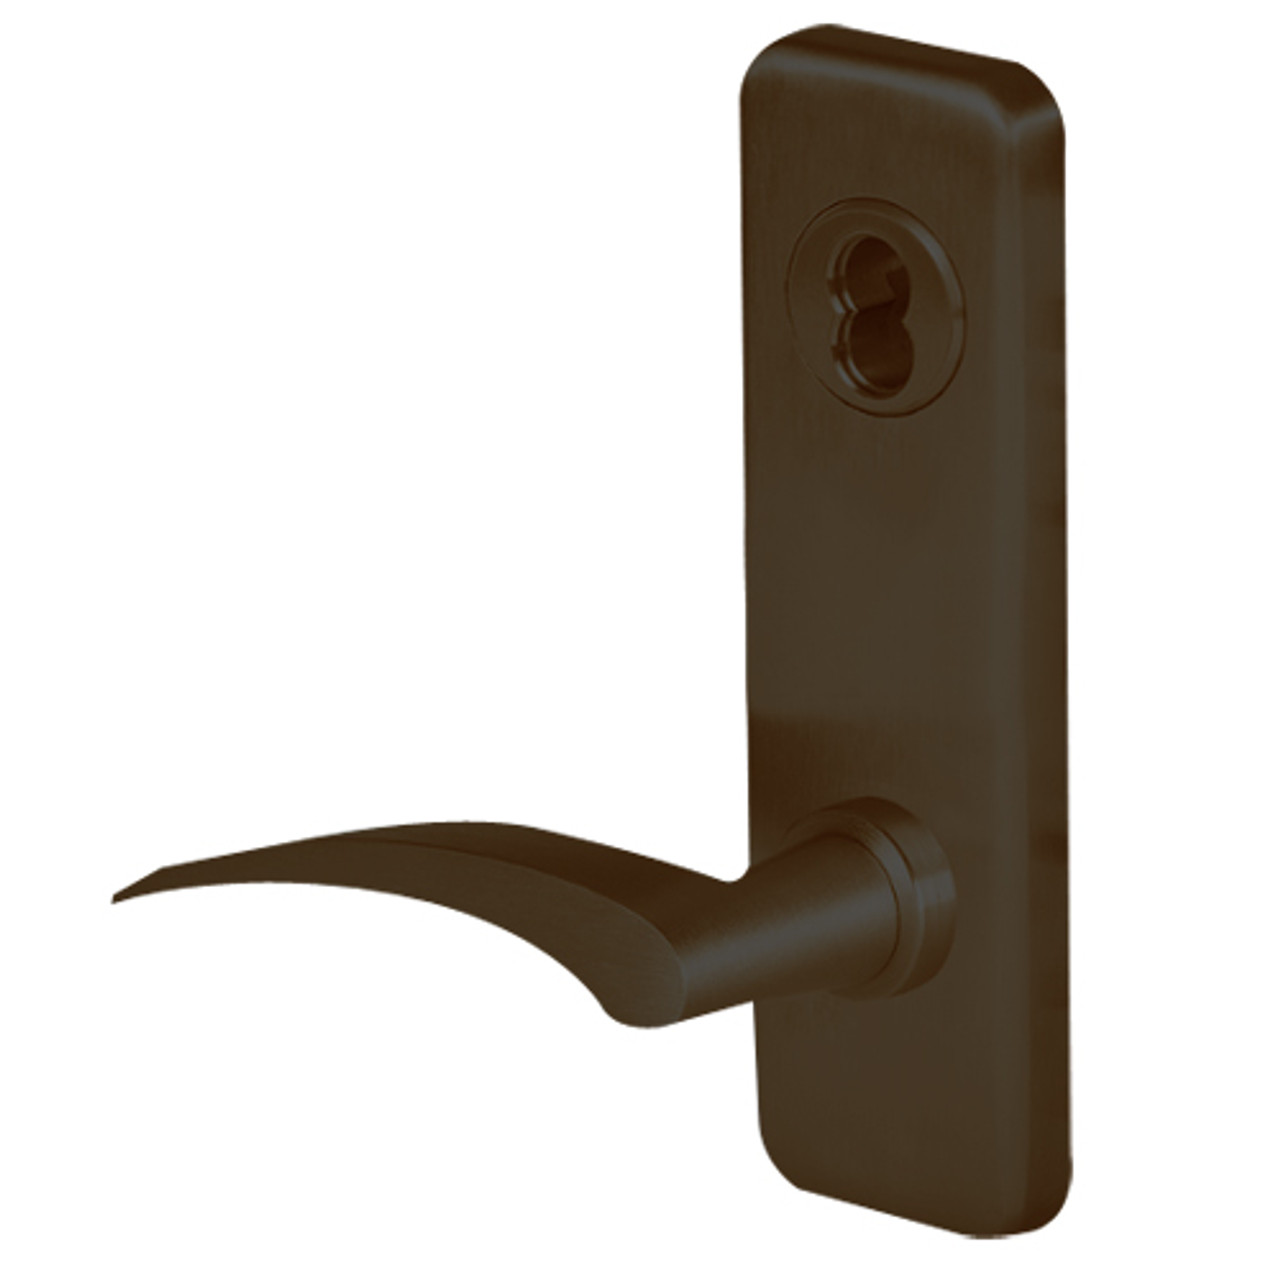 45H7H17LJ613 Best 40H Series Hotel with Deadbolt Heavy Duty Mortise Lever Lock with Gull Wing LH in Oil Rubbed Bronze